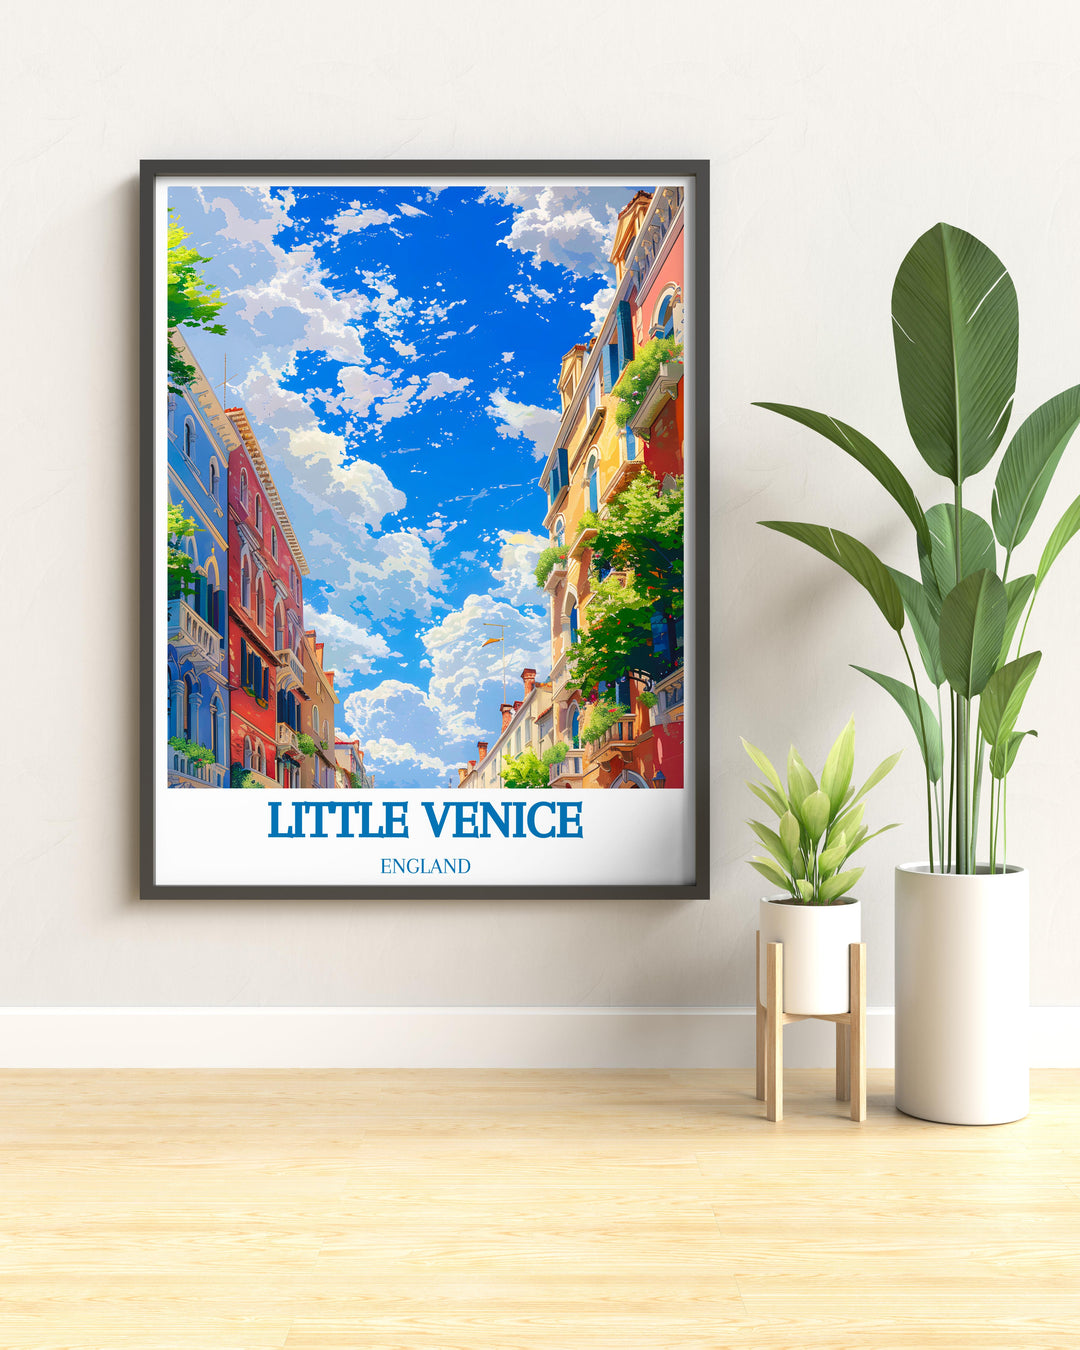 Canvas art of Little Venice Mews, highlighting the architectural details and charm of this unique London area.